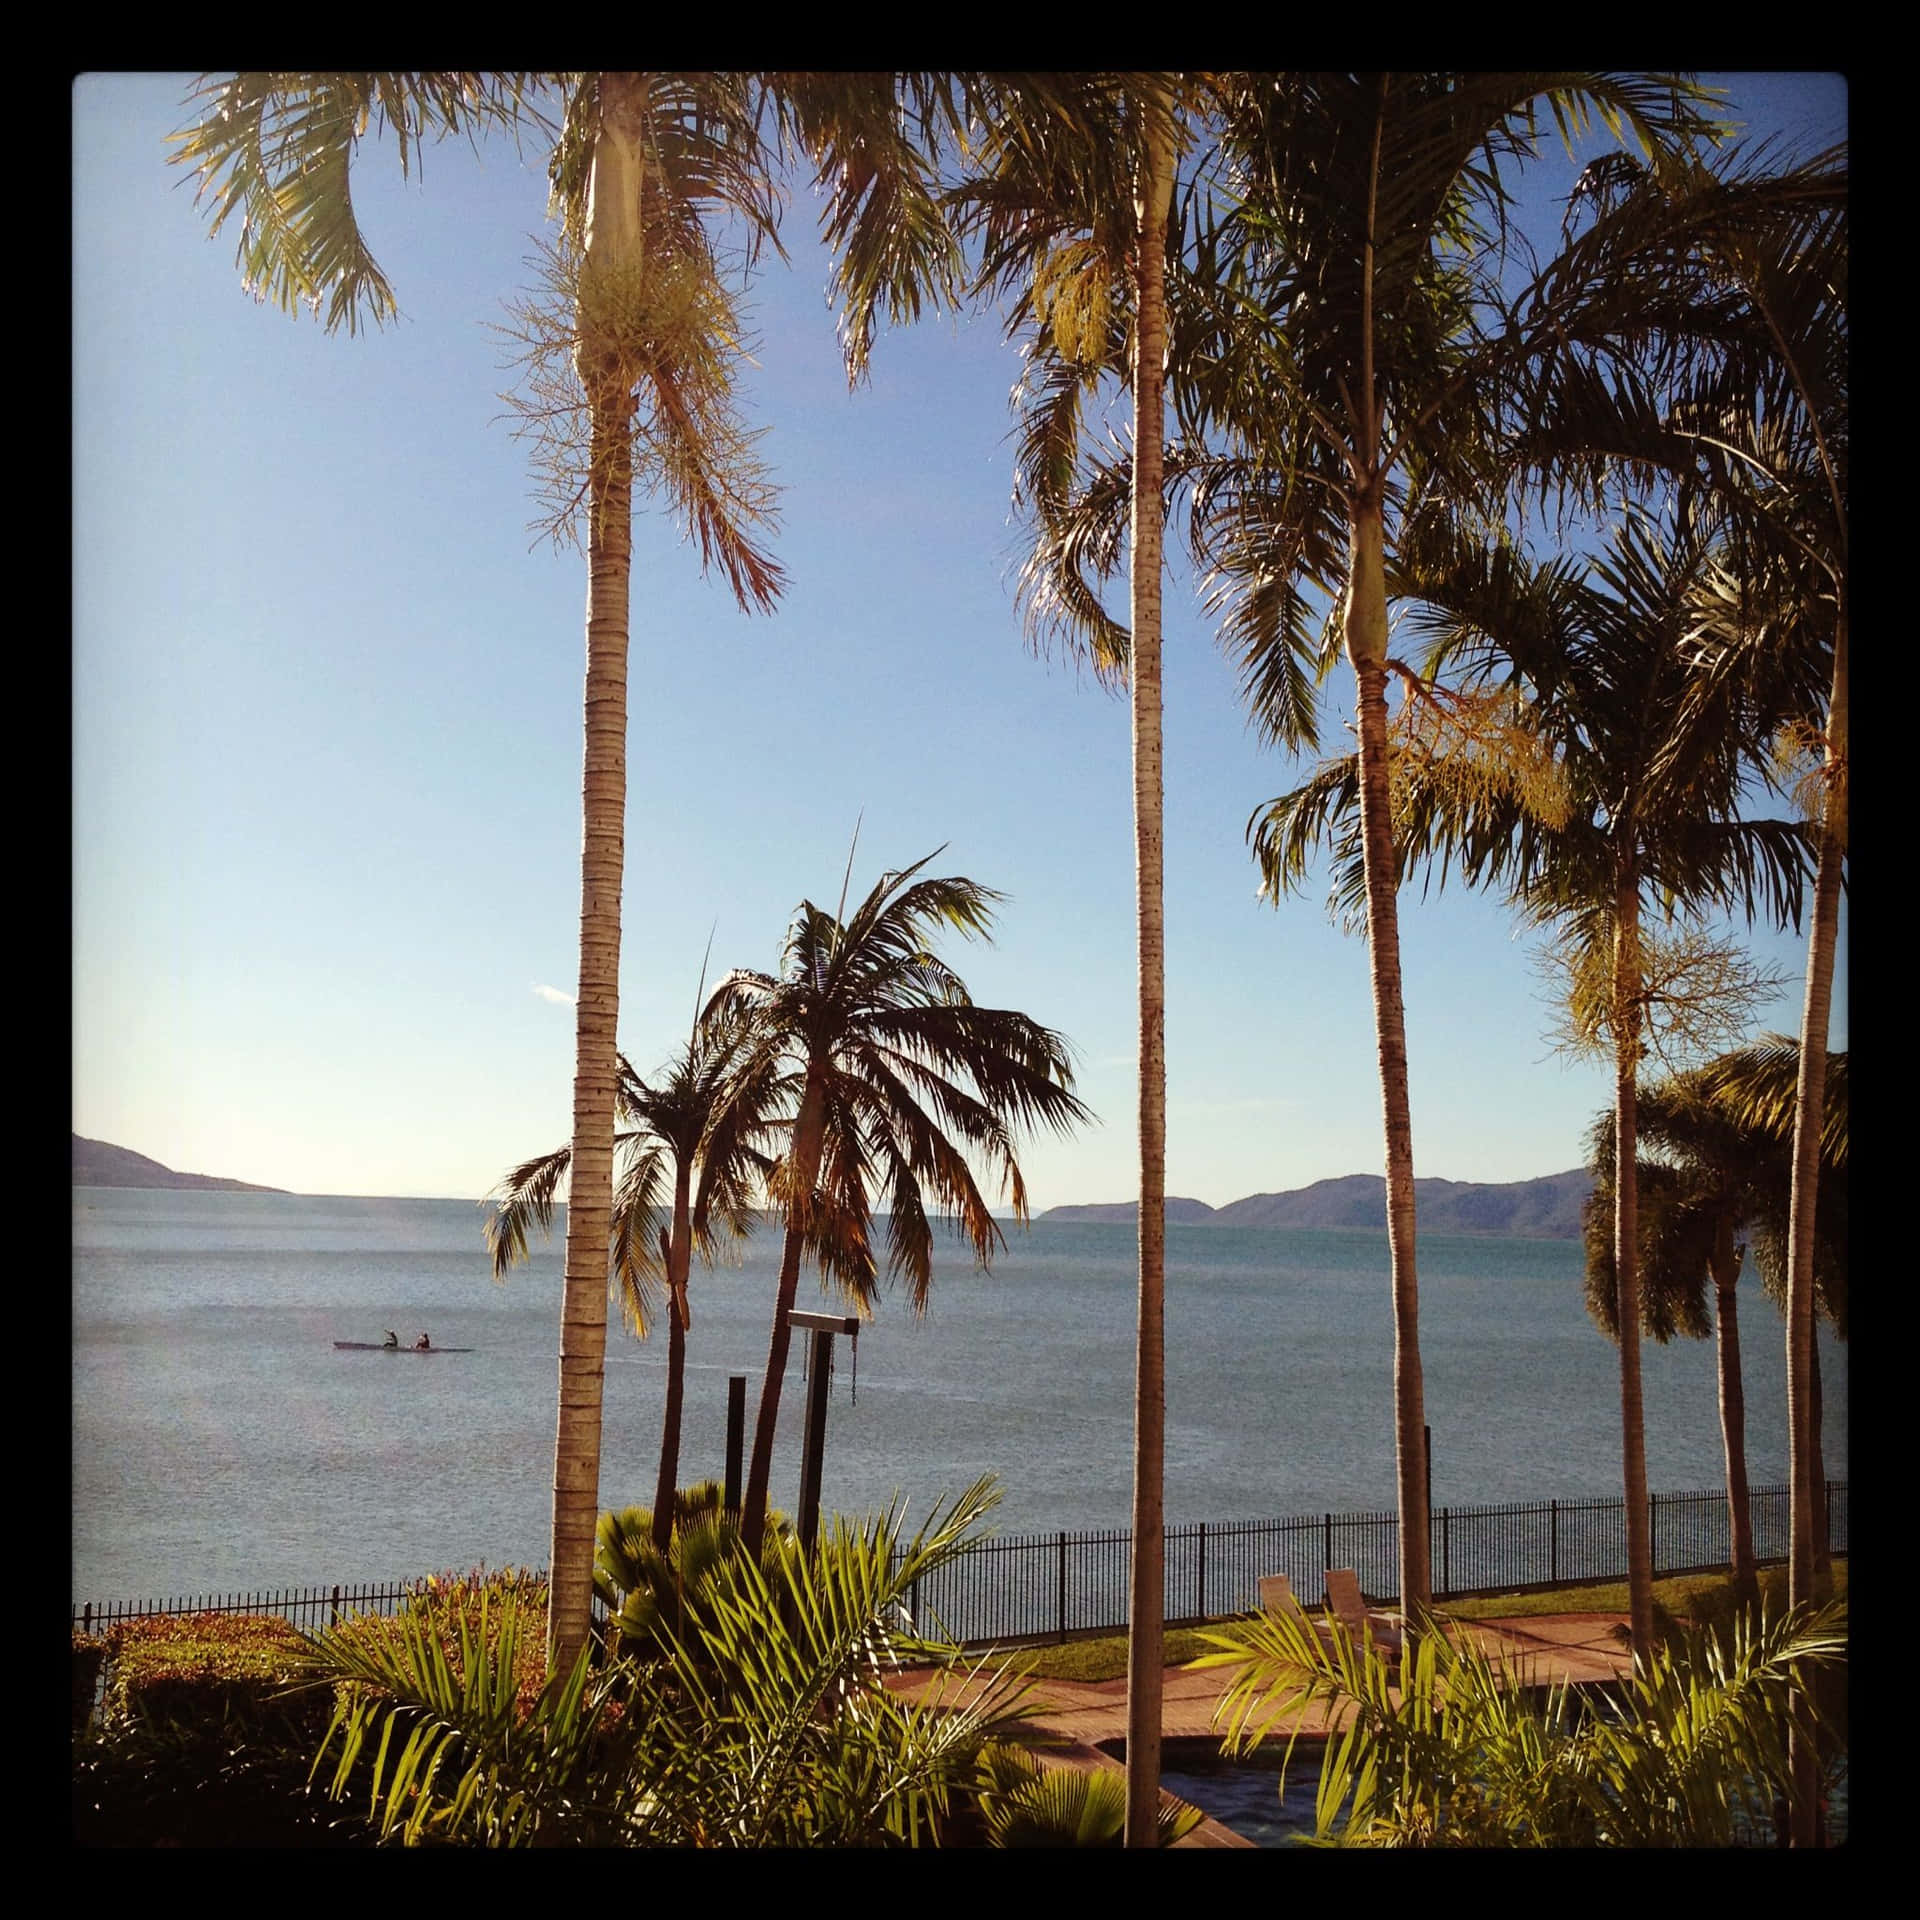 Townsville Tropical Waterfront View Wallpaper